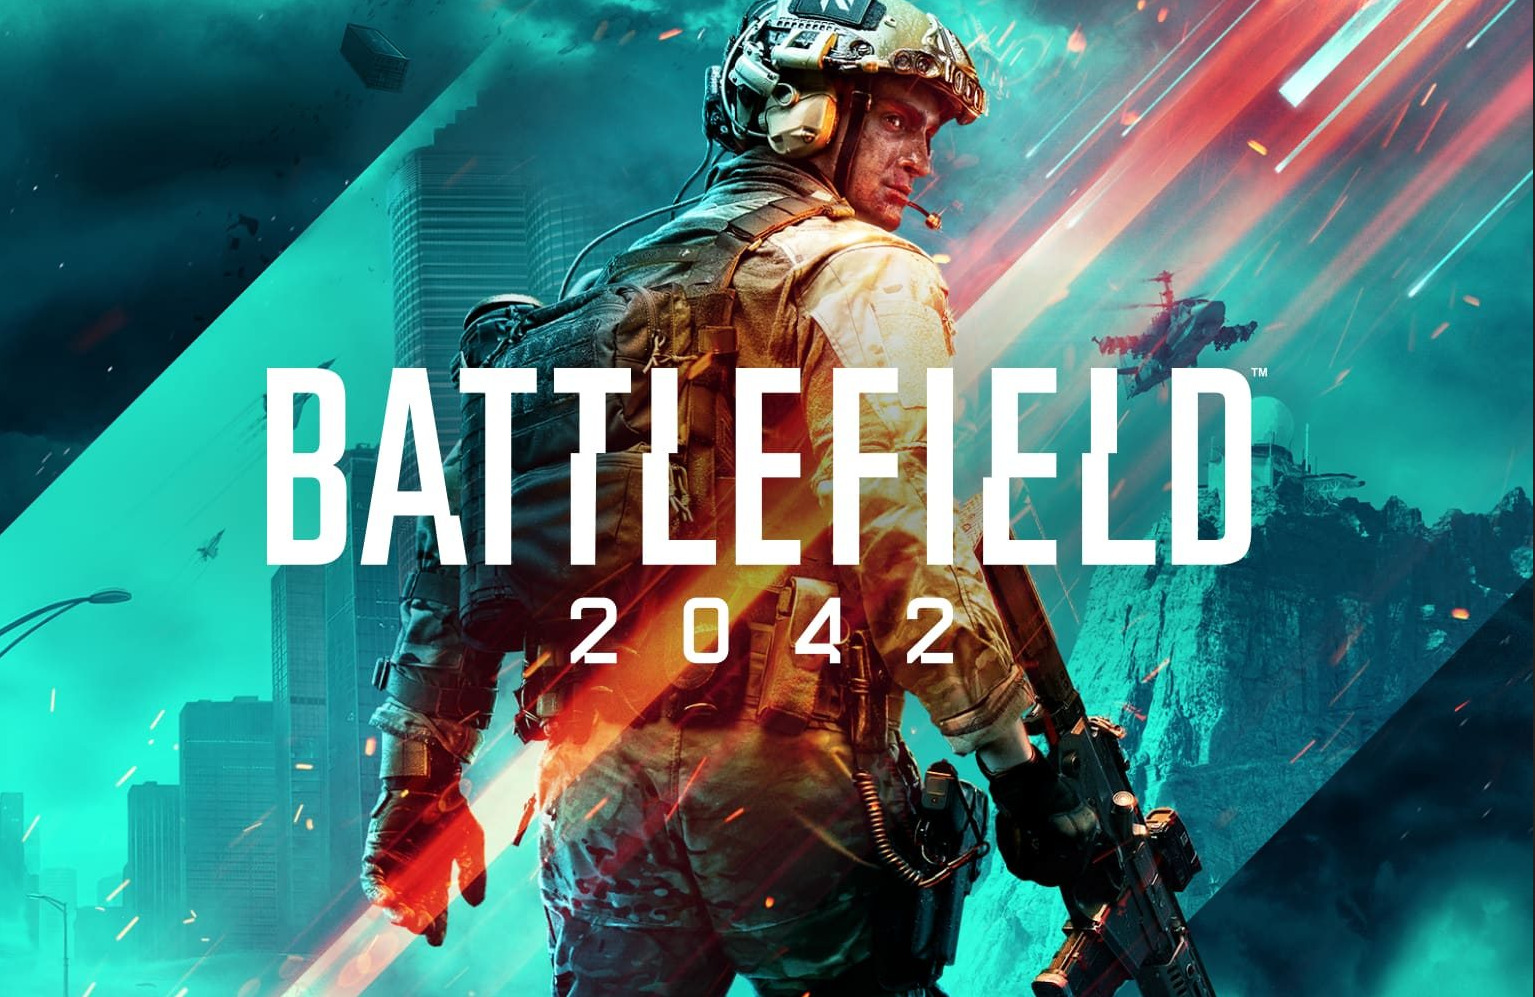 will battlefield 2042 be on game pass